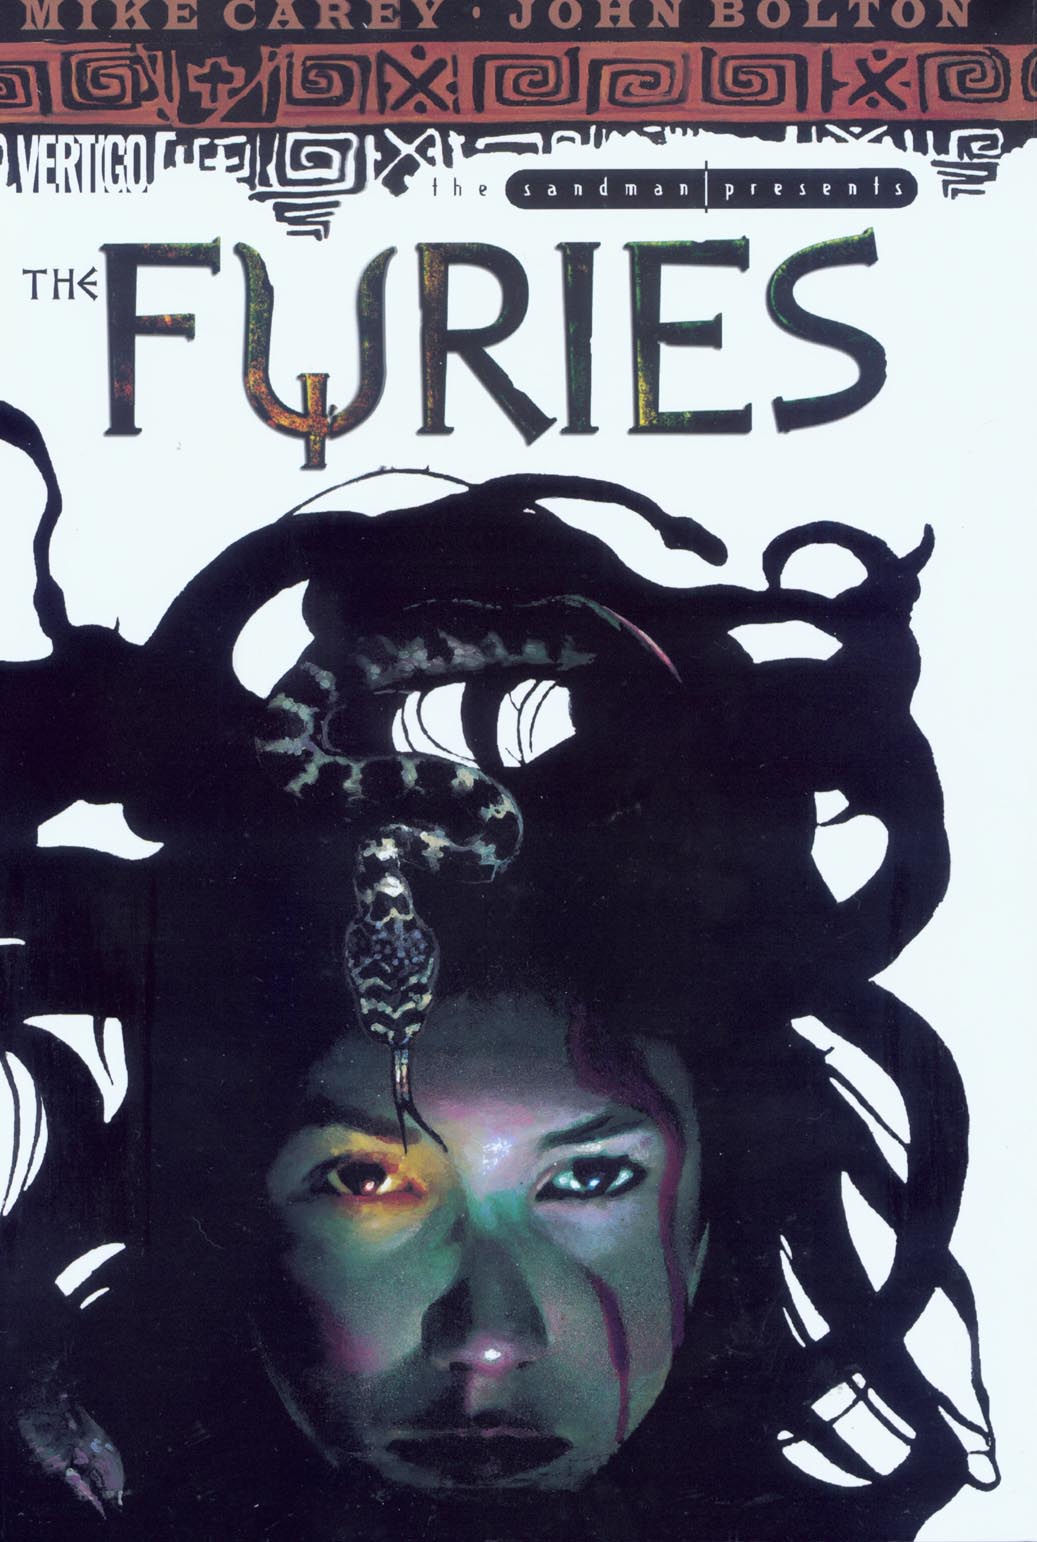 Read online The Sandman Presents: The Furies comic -  Issue # TPB - 2